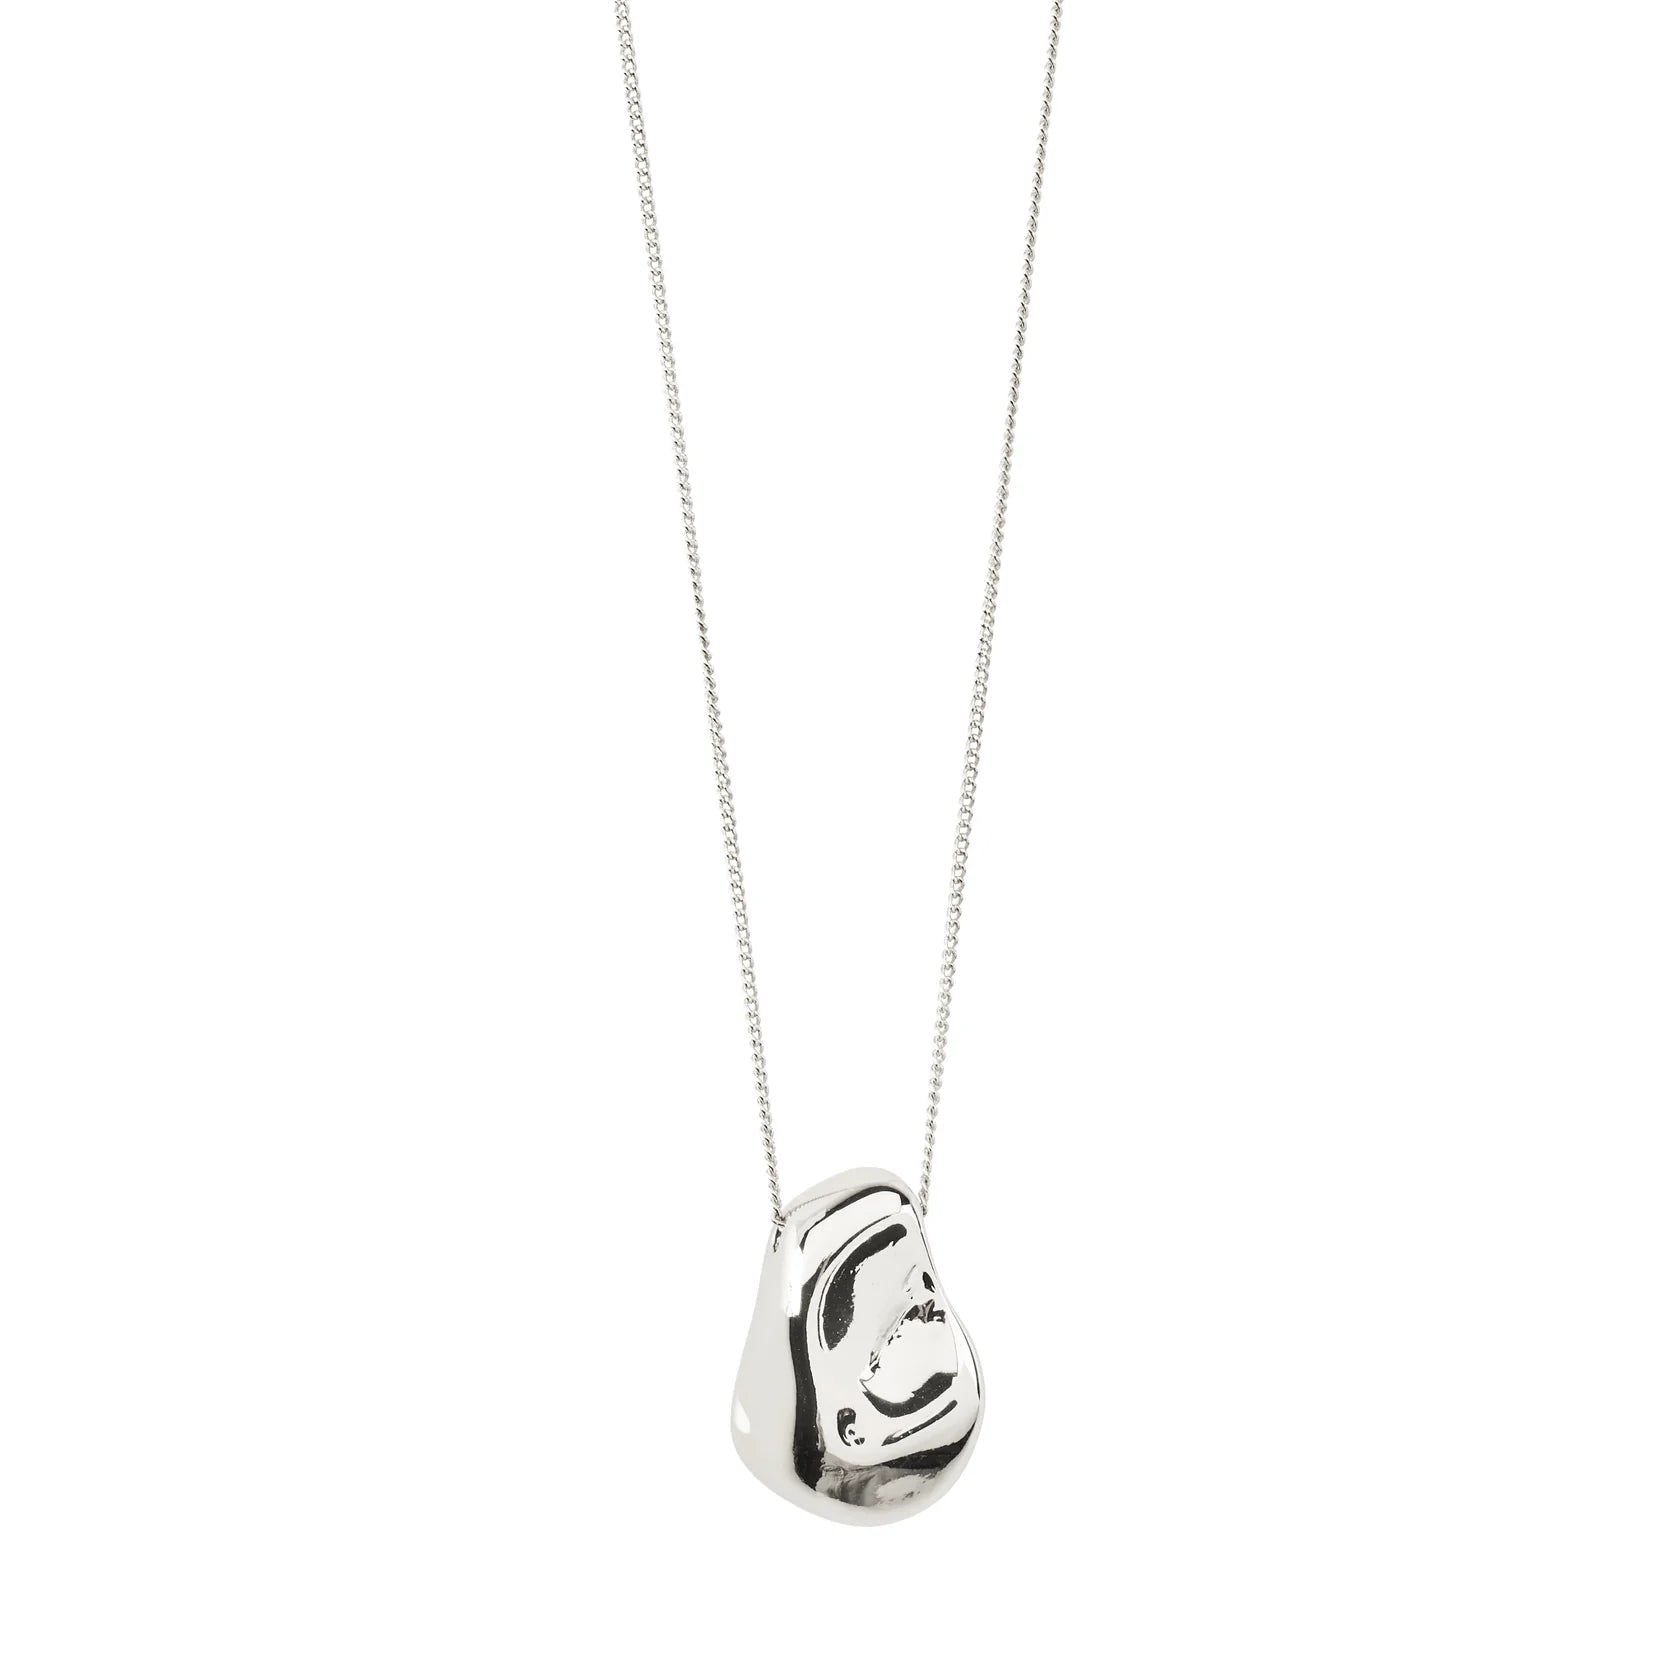 PILGRIM CHANTAL NECKLACE SILVER PLATED